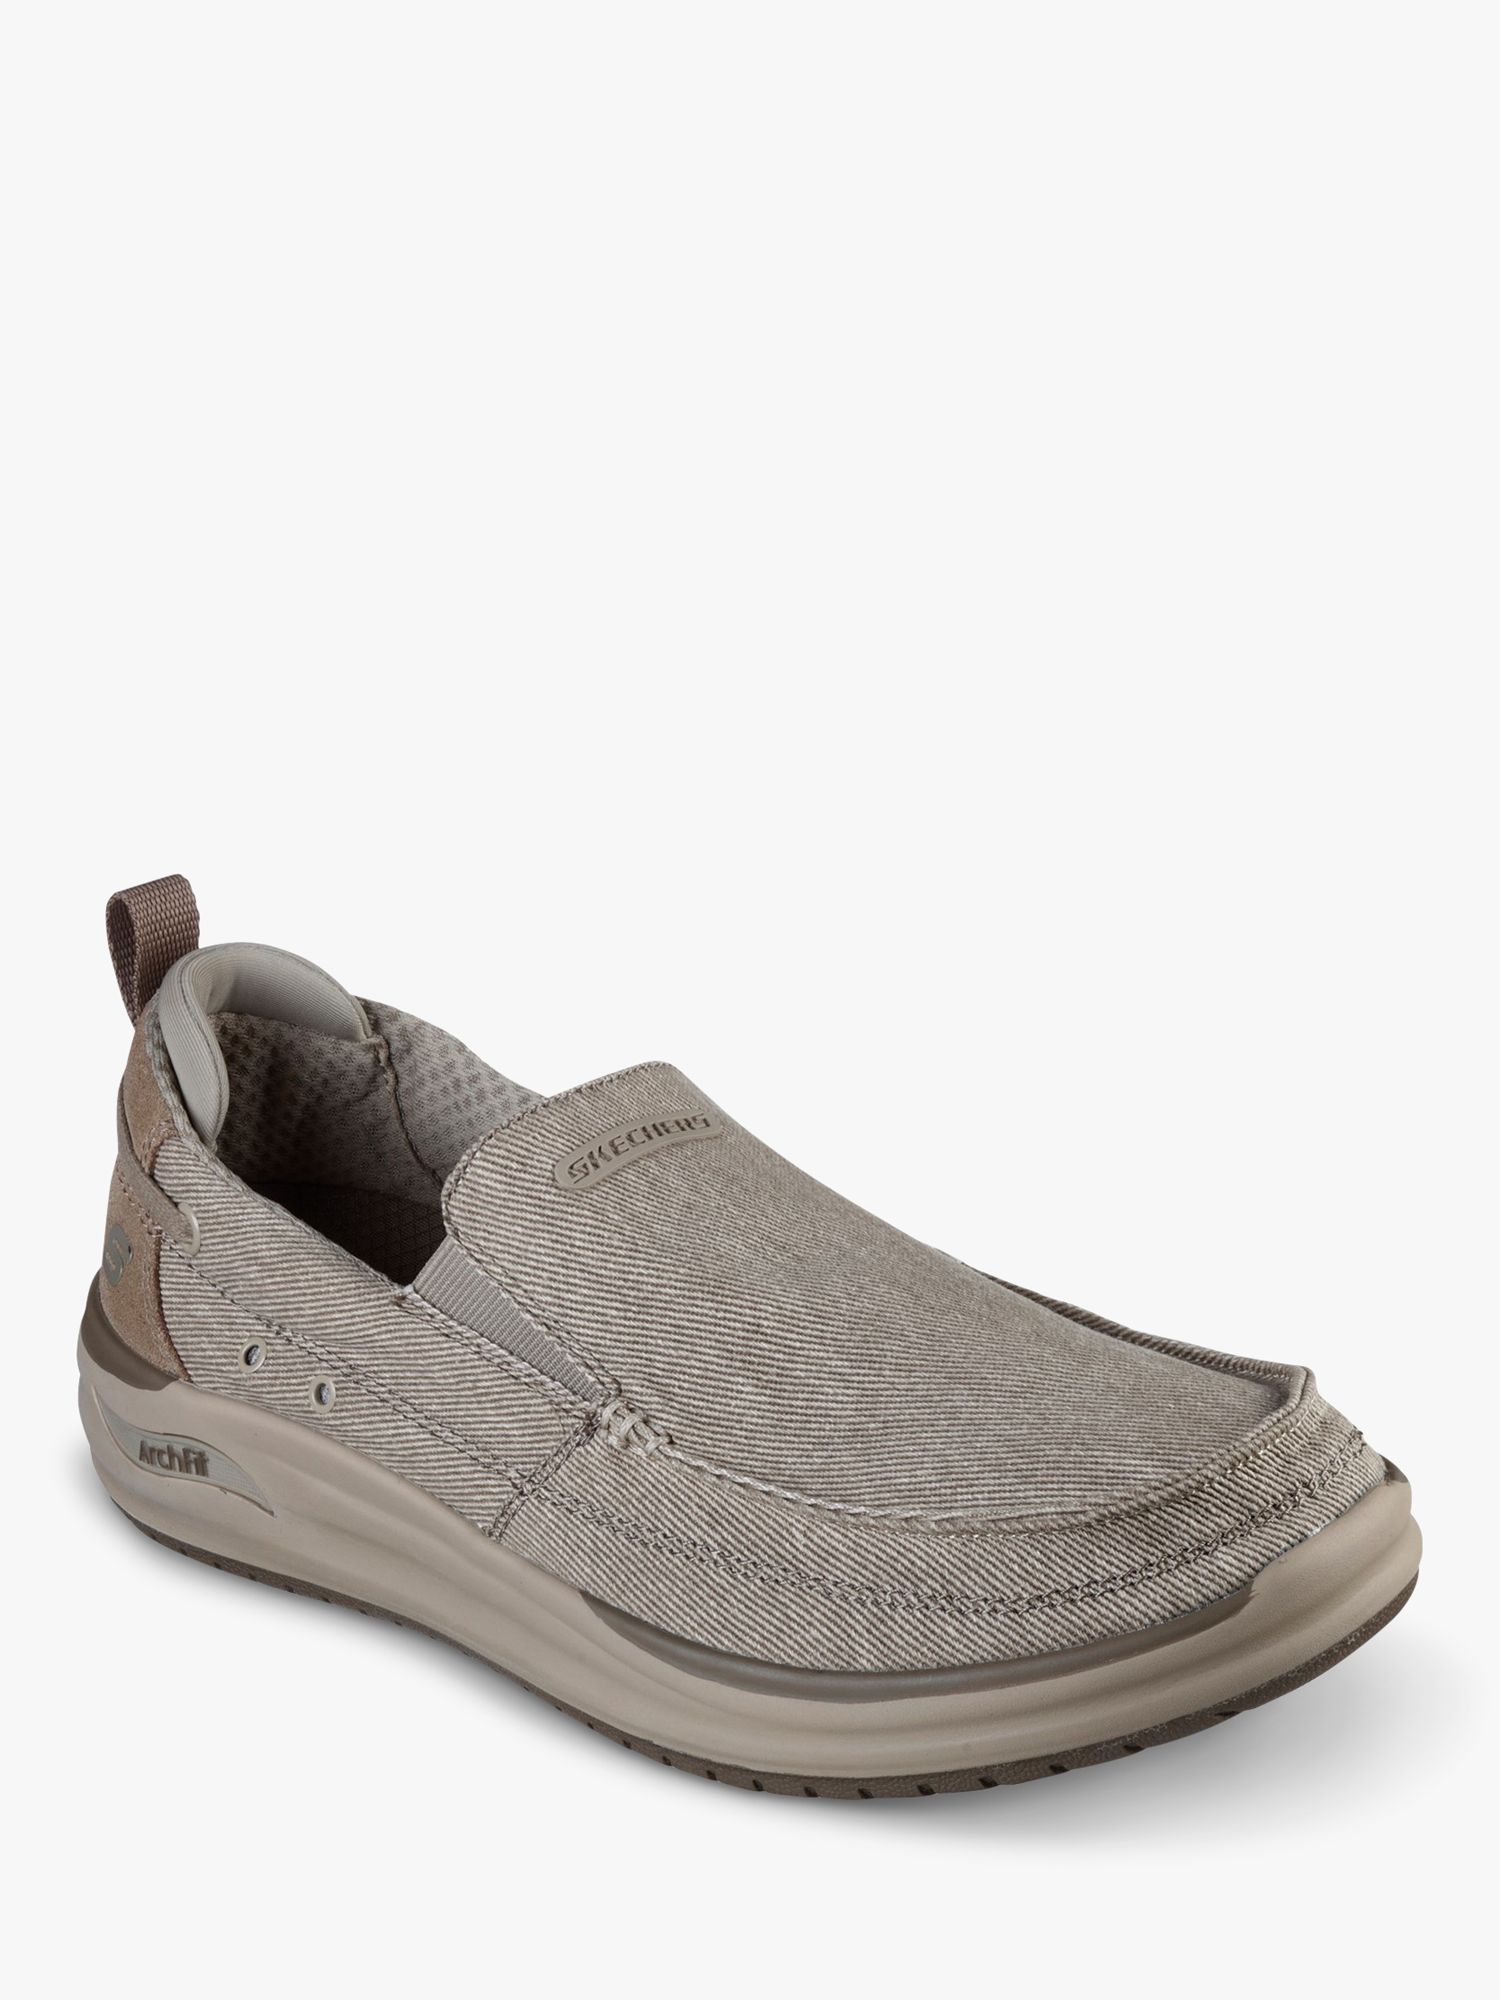 Skechers Relaxed Fit Arch Fit Melo Port Bow Casual Shoes, Taupe at John ...